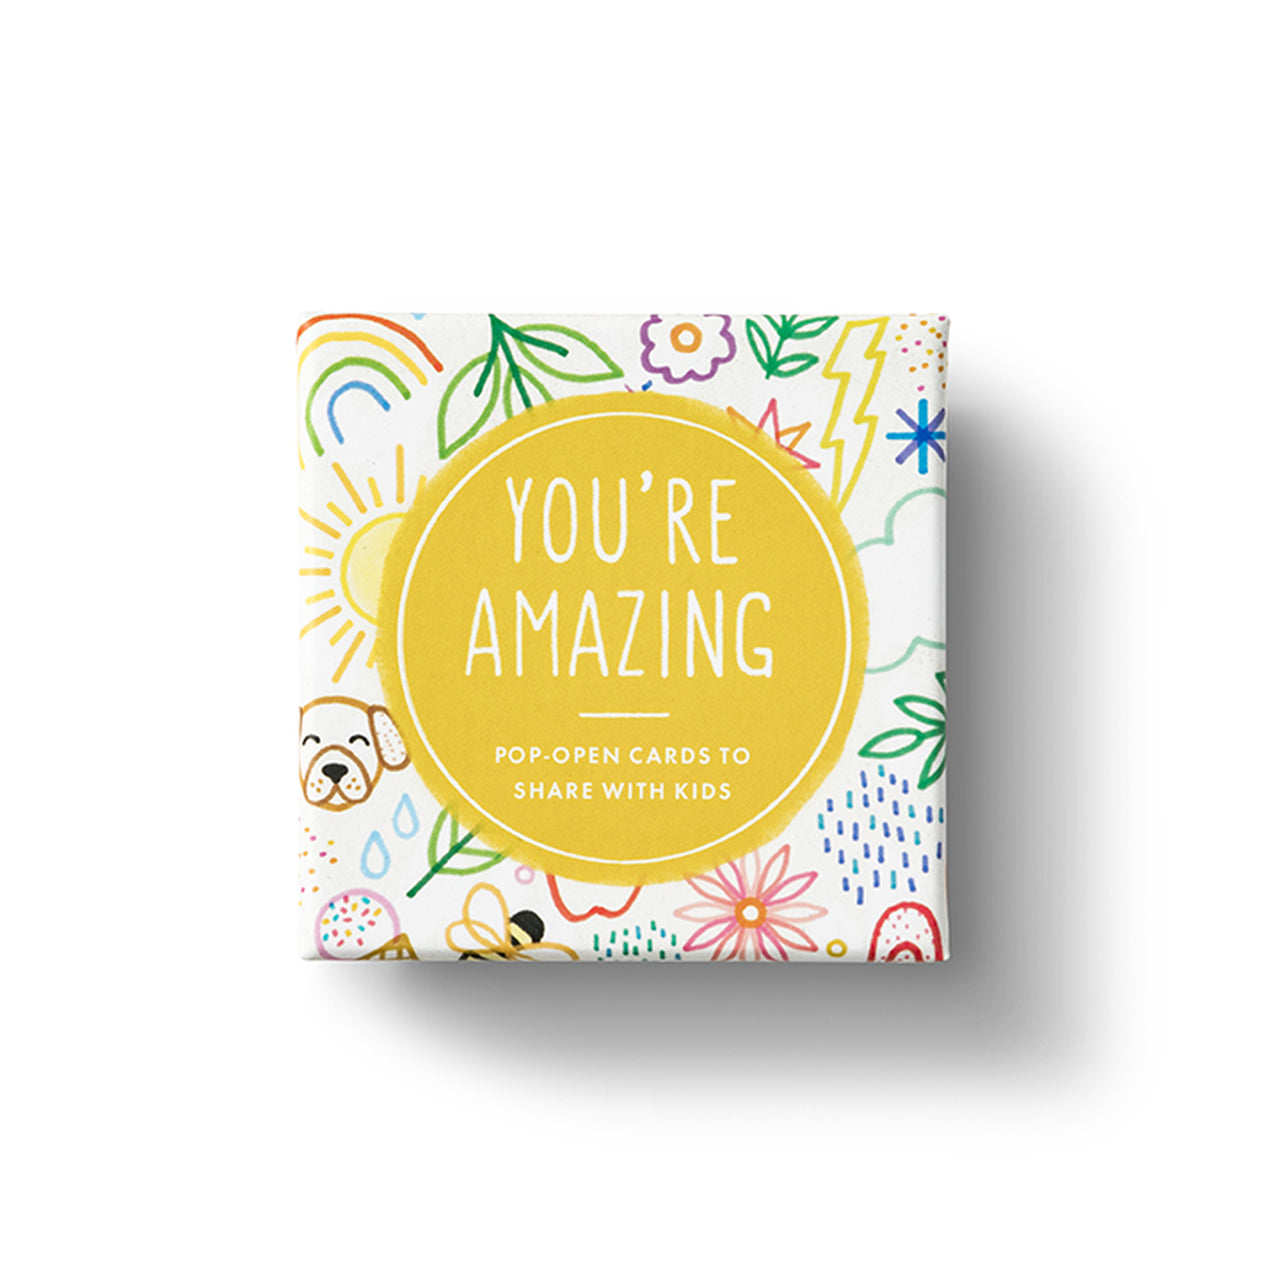 Thoughtfulls for Kids Pop-Open Cards - You're Amazing Cards Compendium 